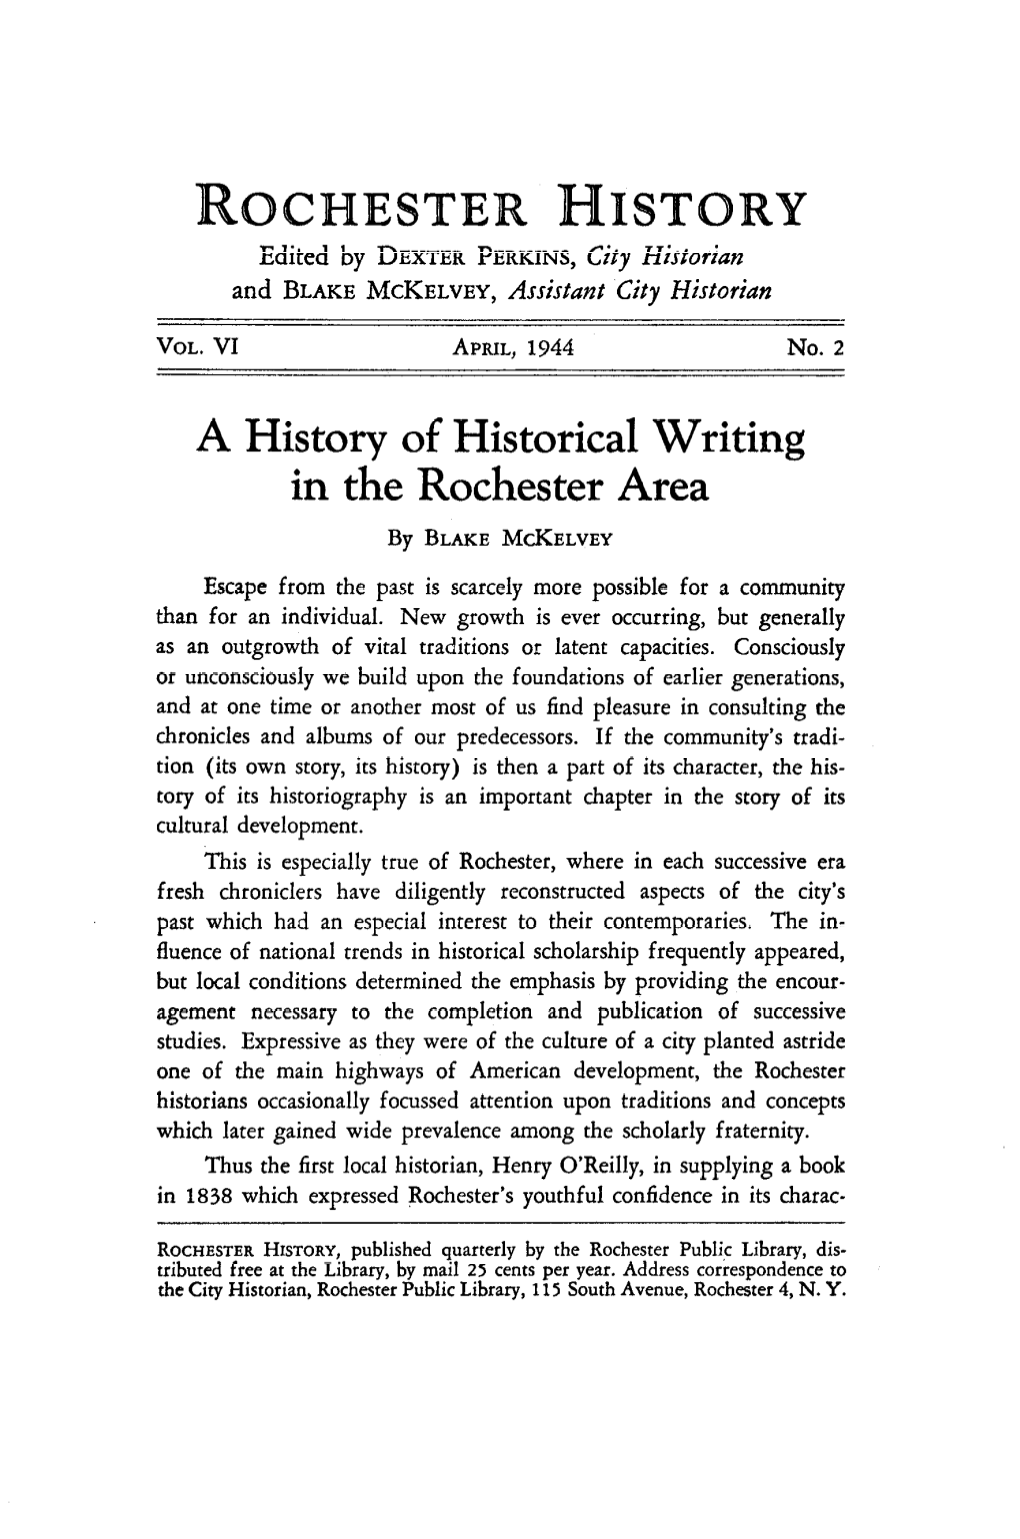 ROCHESTER HISTORY Edited by DEXTER PERKINS, City Historian and BLAKE MCKELVEY, Assistant City Historian